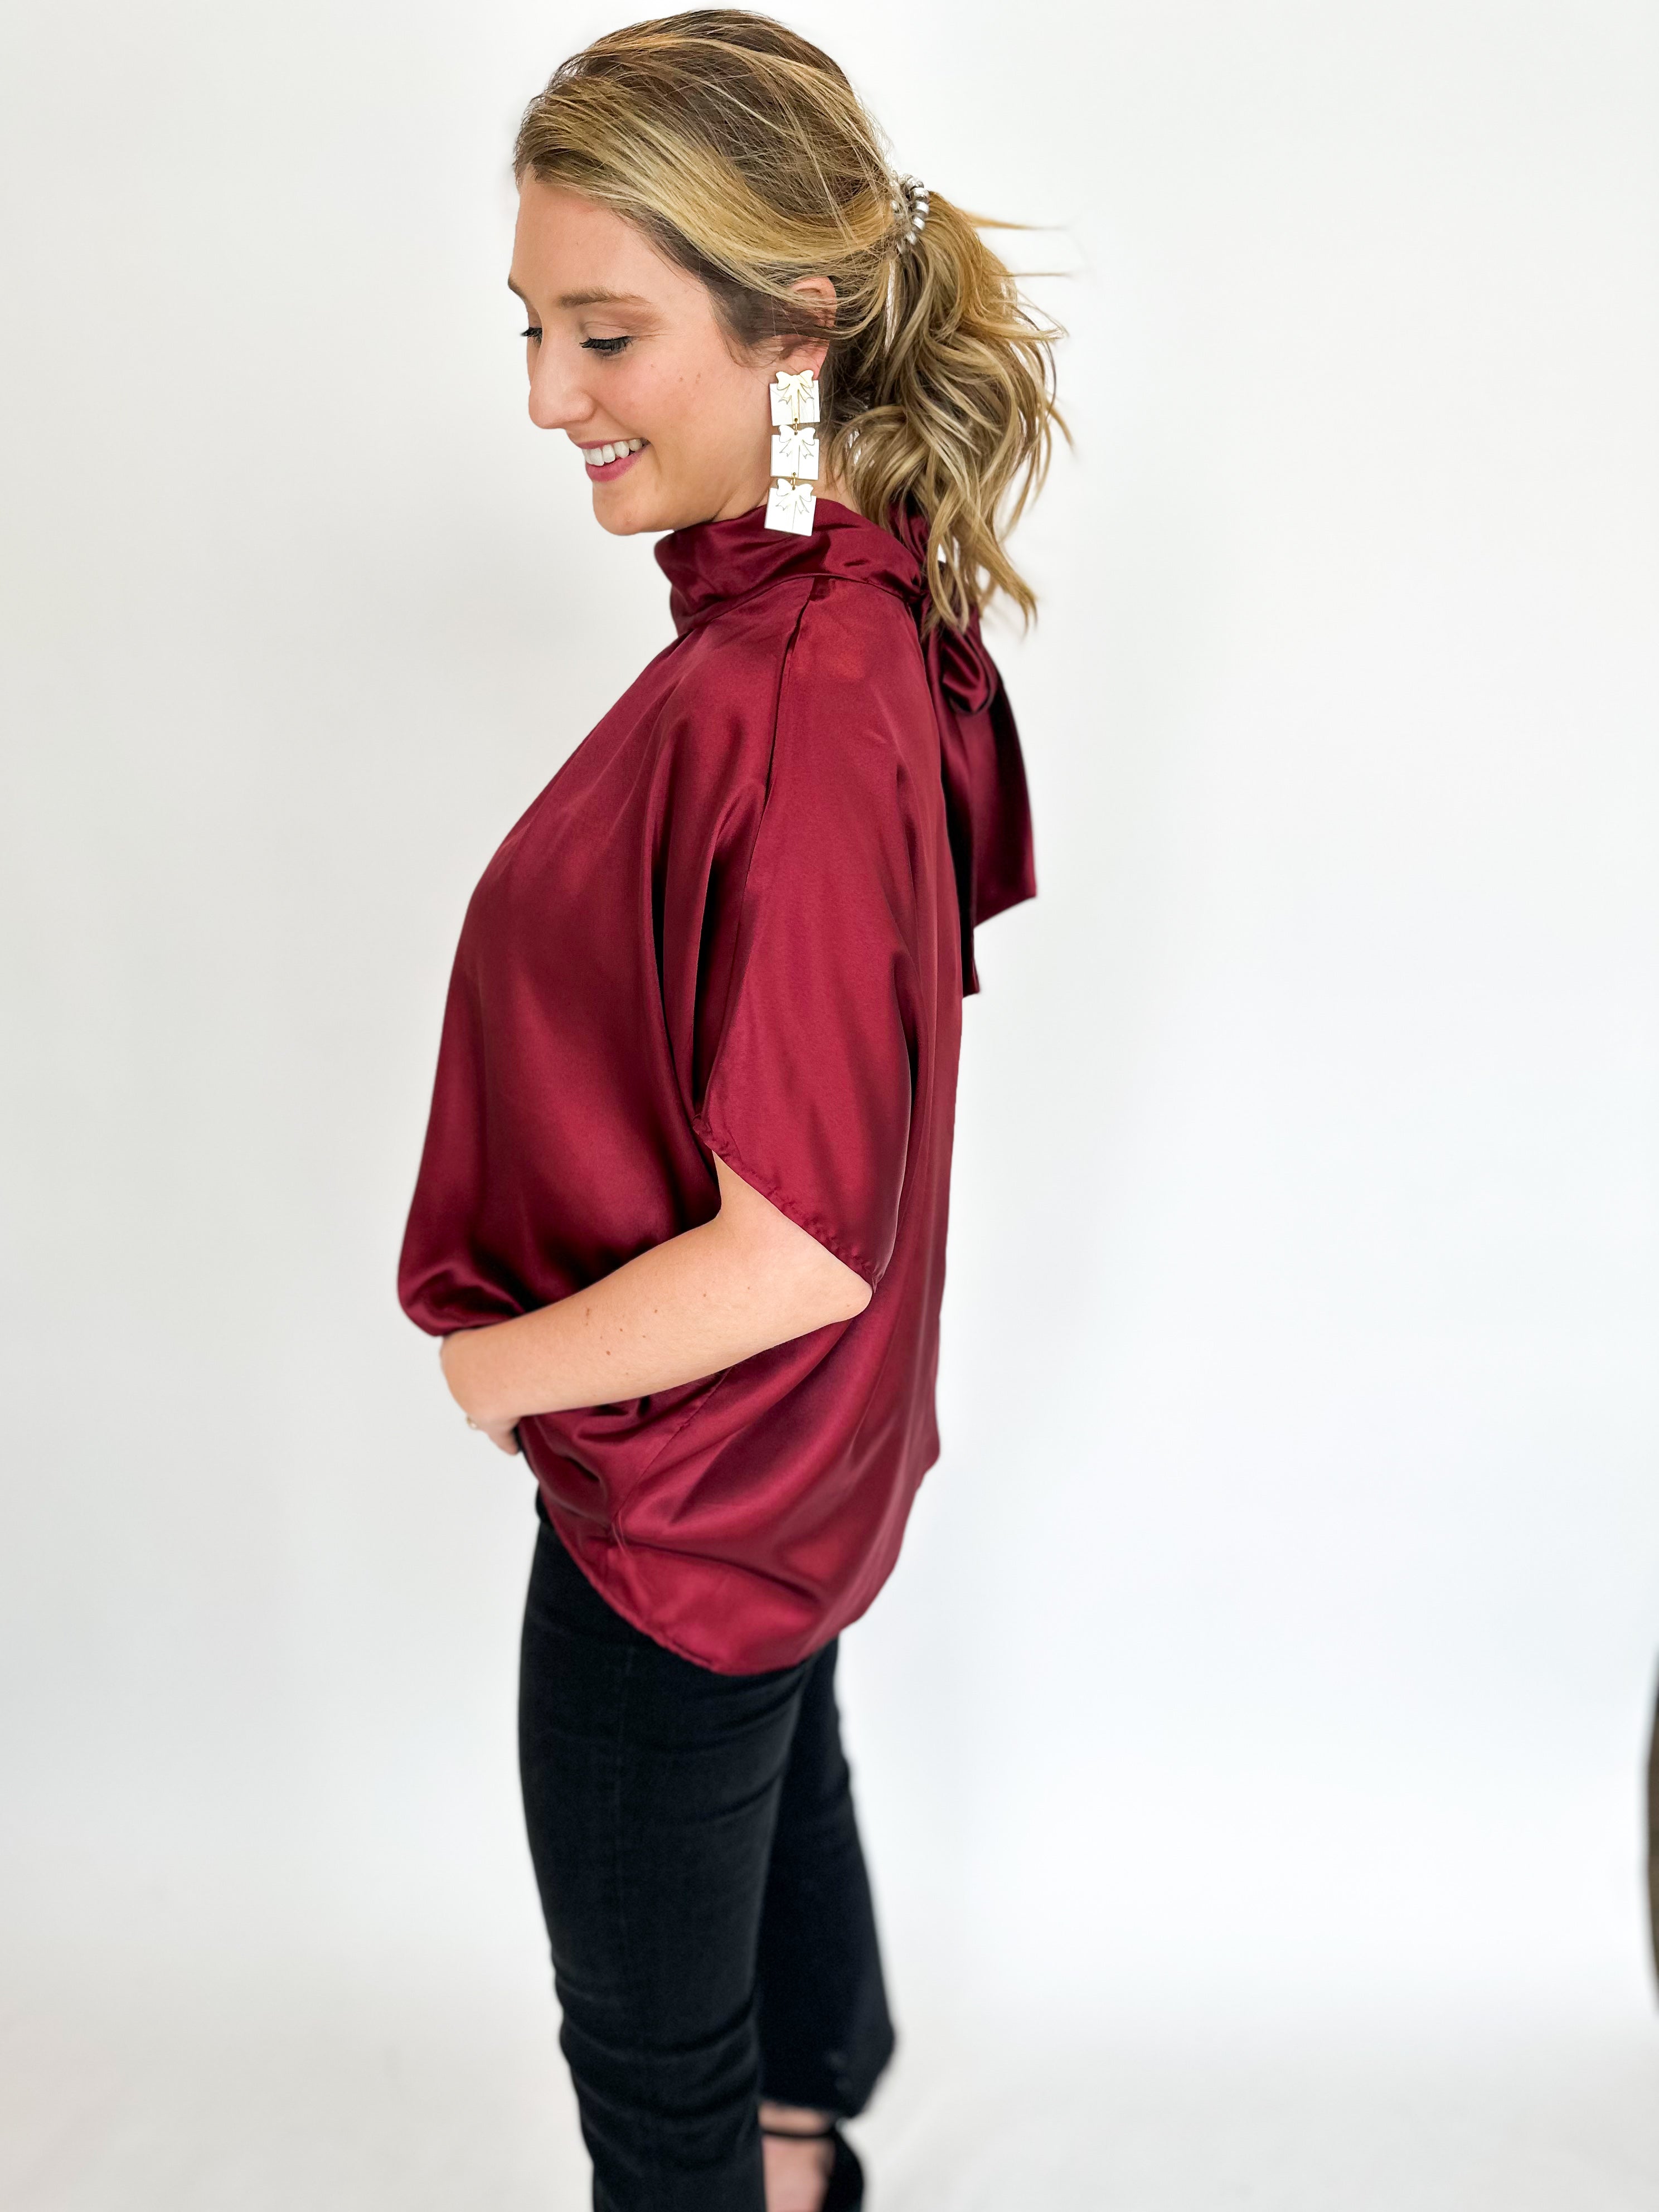 Charming Satin Blouse - Wine-200 Fashion Blouses-ADRIENNE-July & June Women's Fashion Boutique Located in San Antonio, Texas